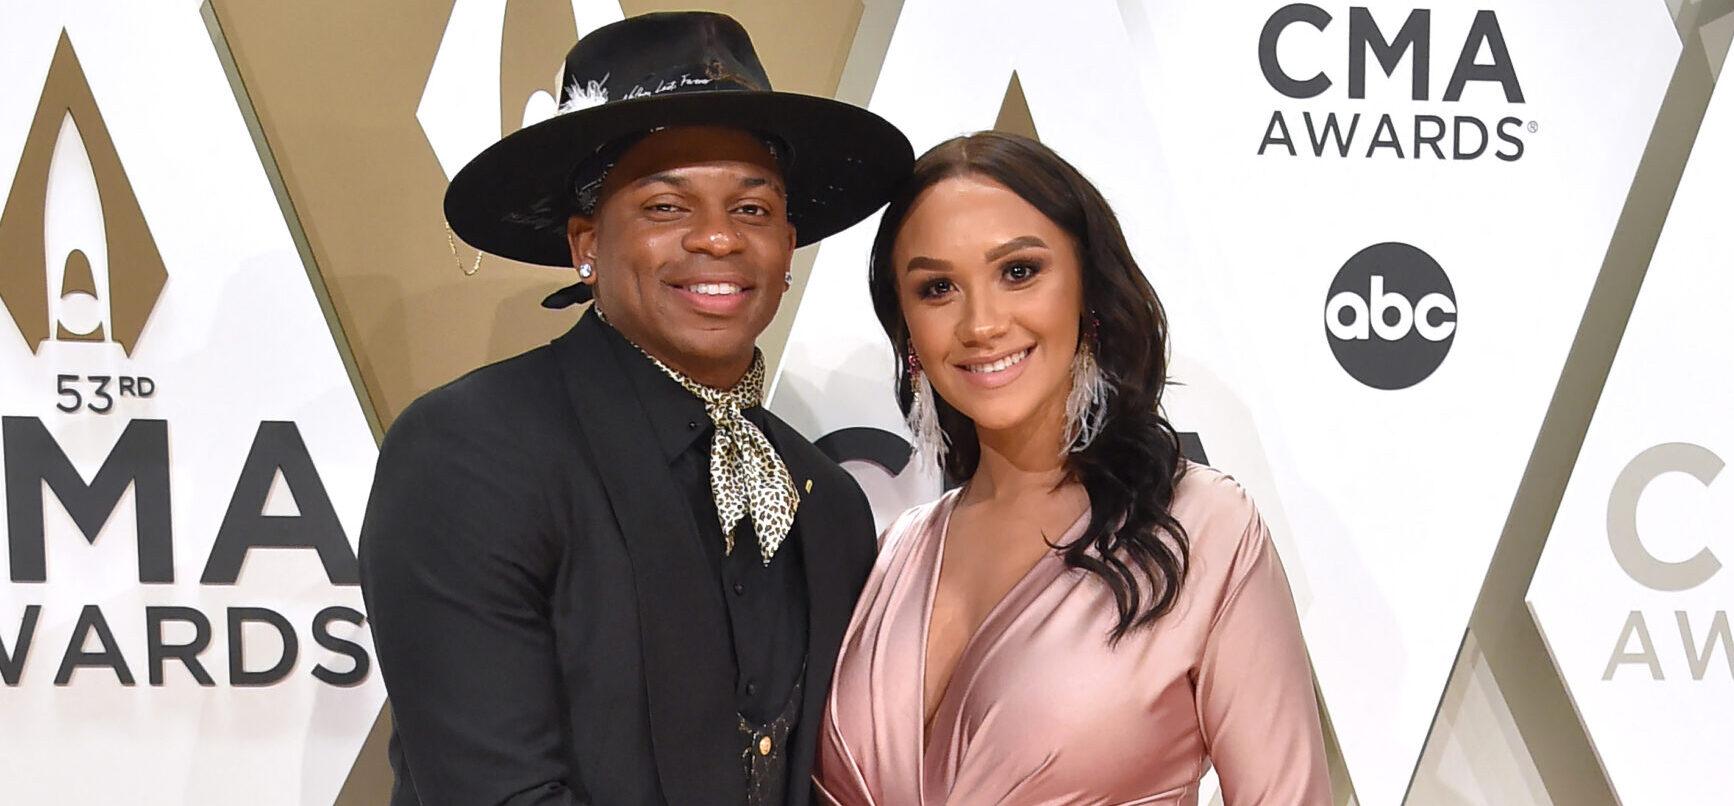 Country Star Jimmie Allen And Wife Alexis Gale Are Separating Amid Her Third Pregnancy